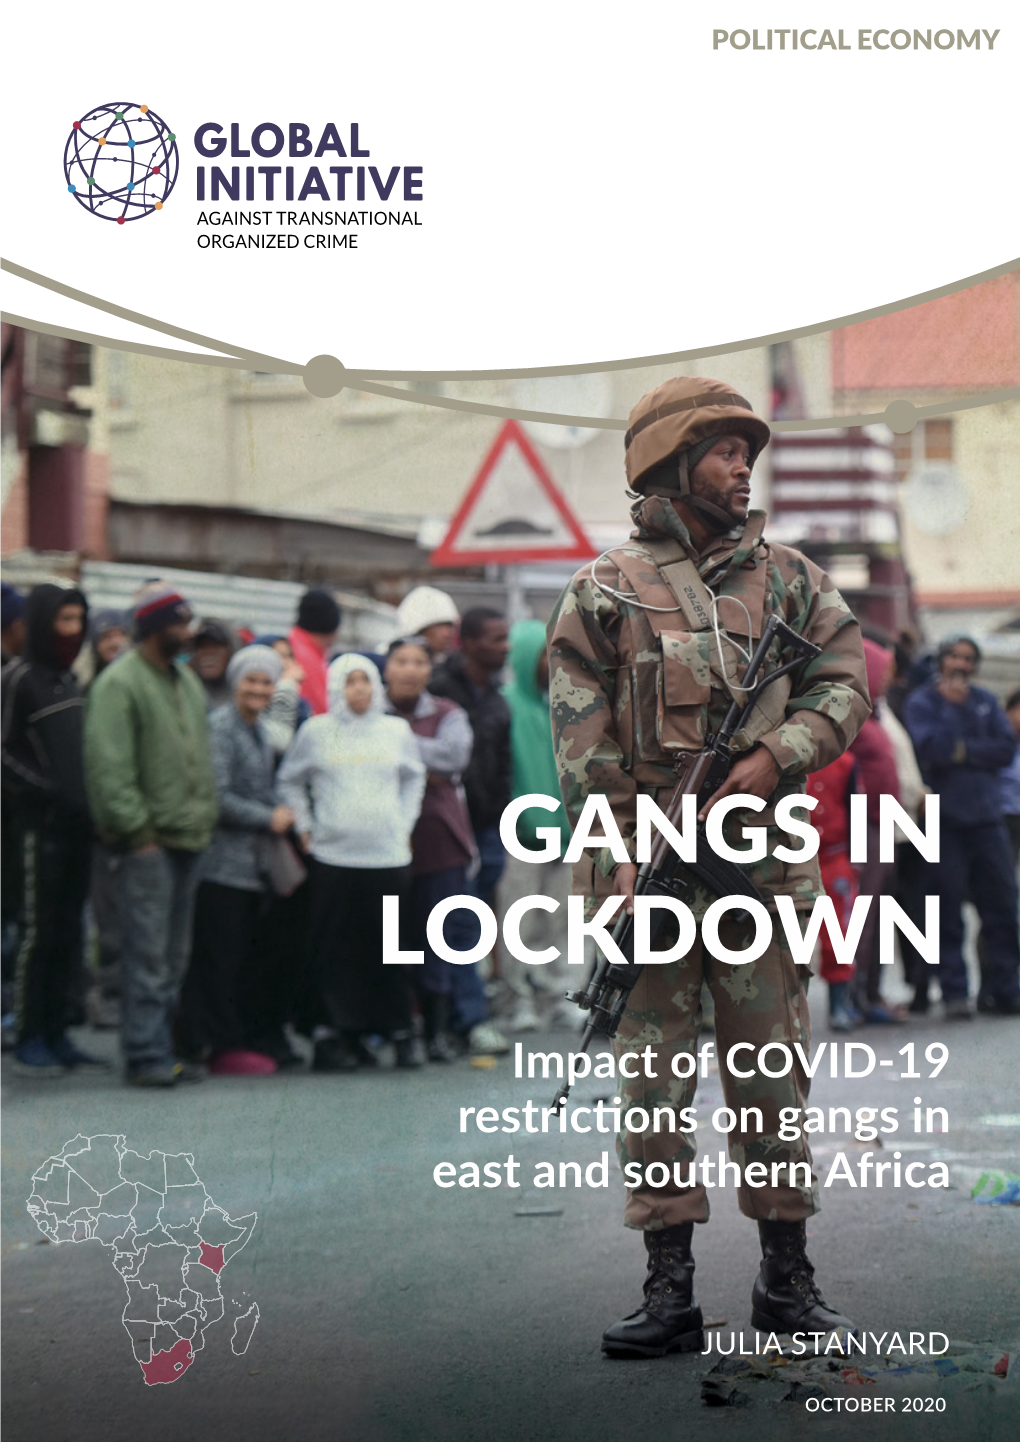 Impact of COVID-19 Restrictions on Gangs in East and Southern Africa